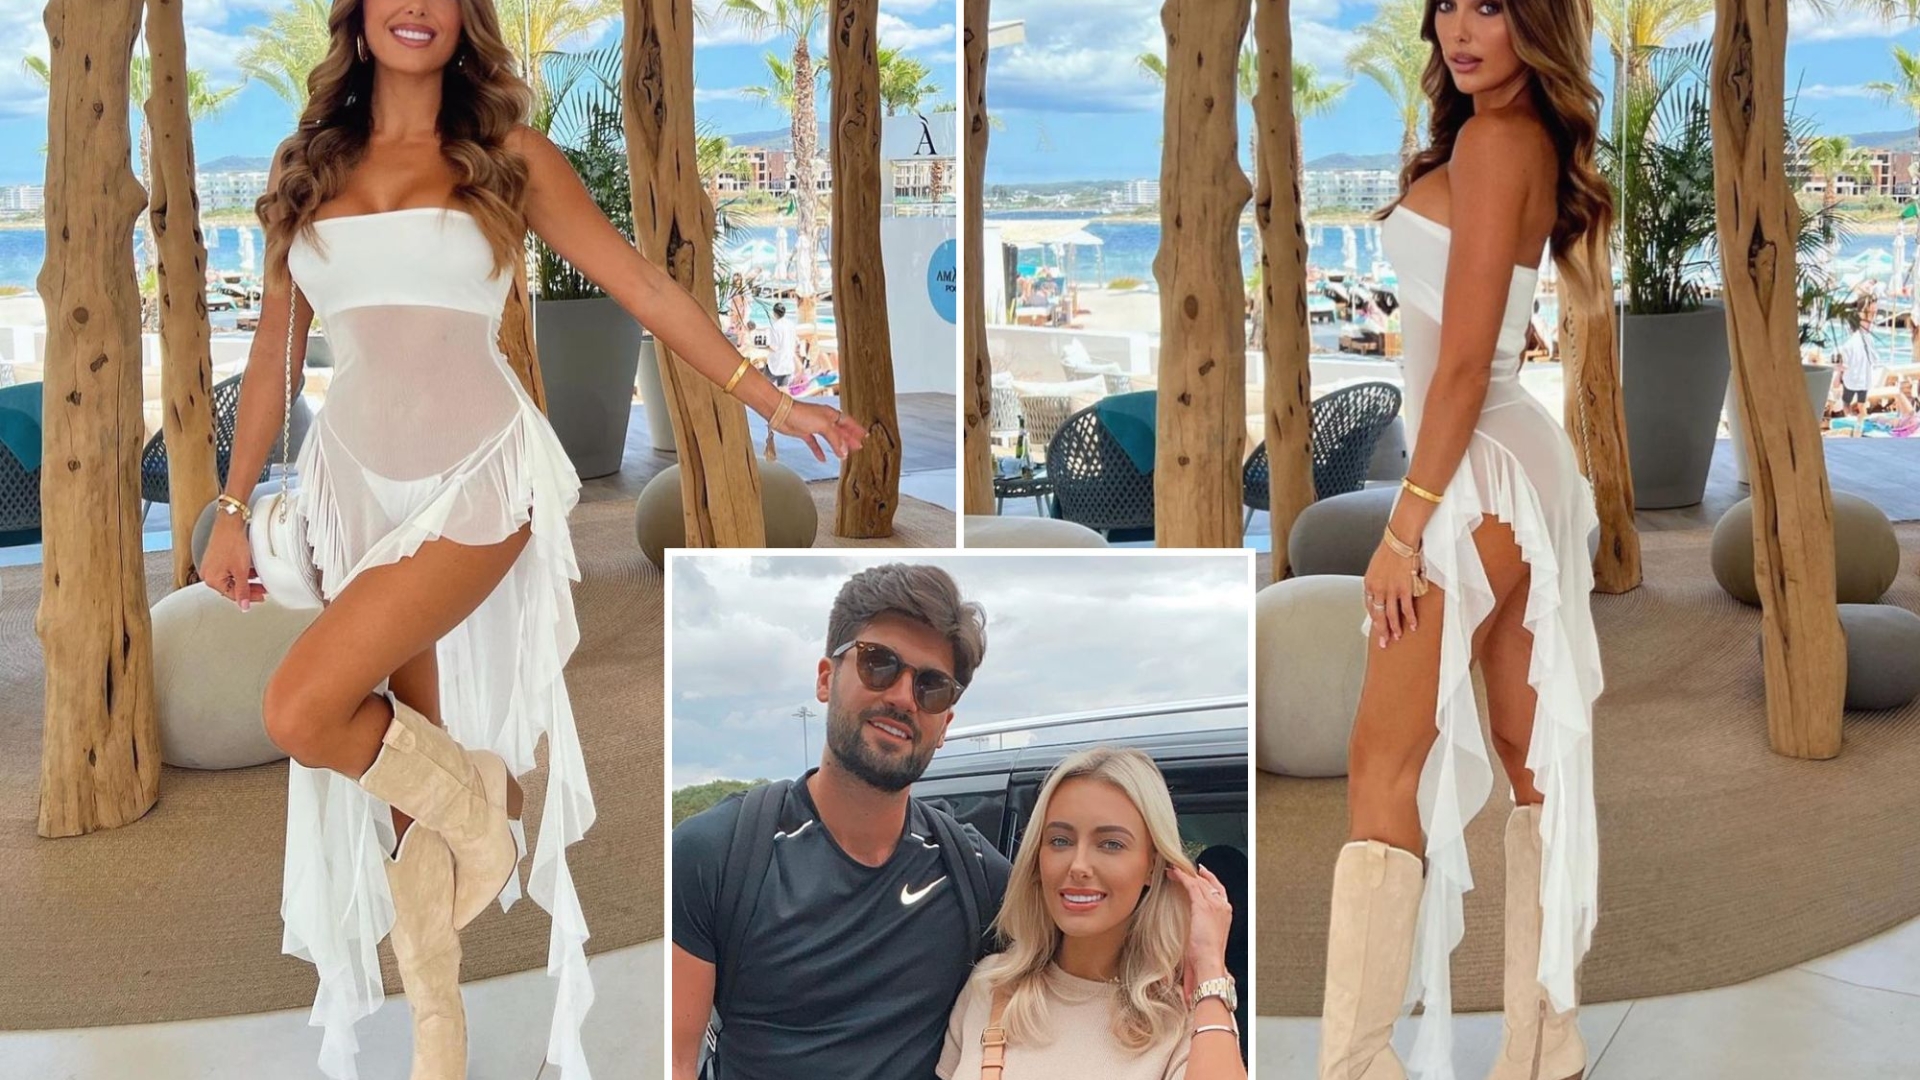 Amber Turner, Towie’s Amber Turner is stunning with her hair and dress transformation after splitting from Dan Edgar